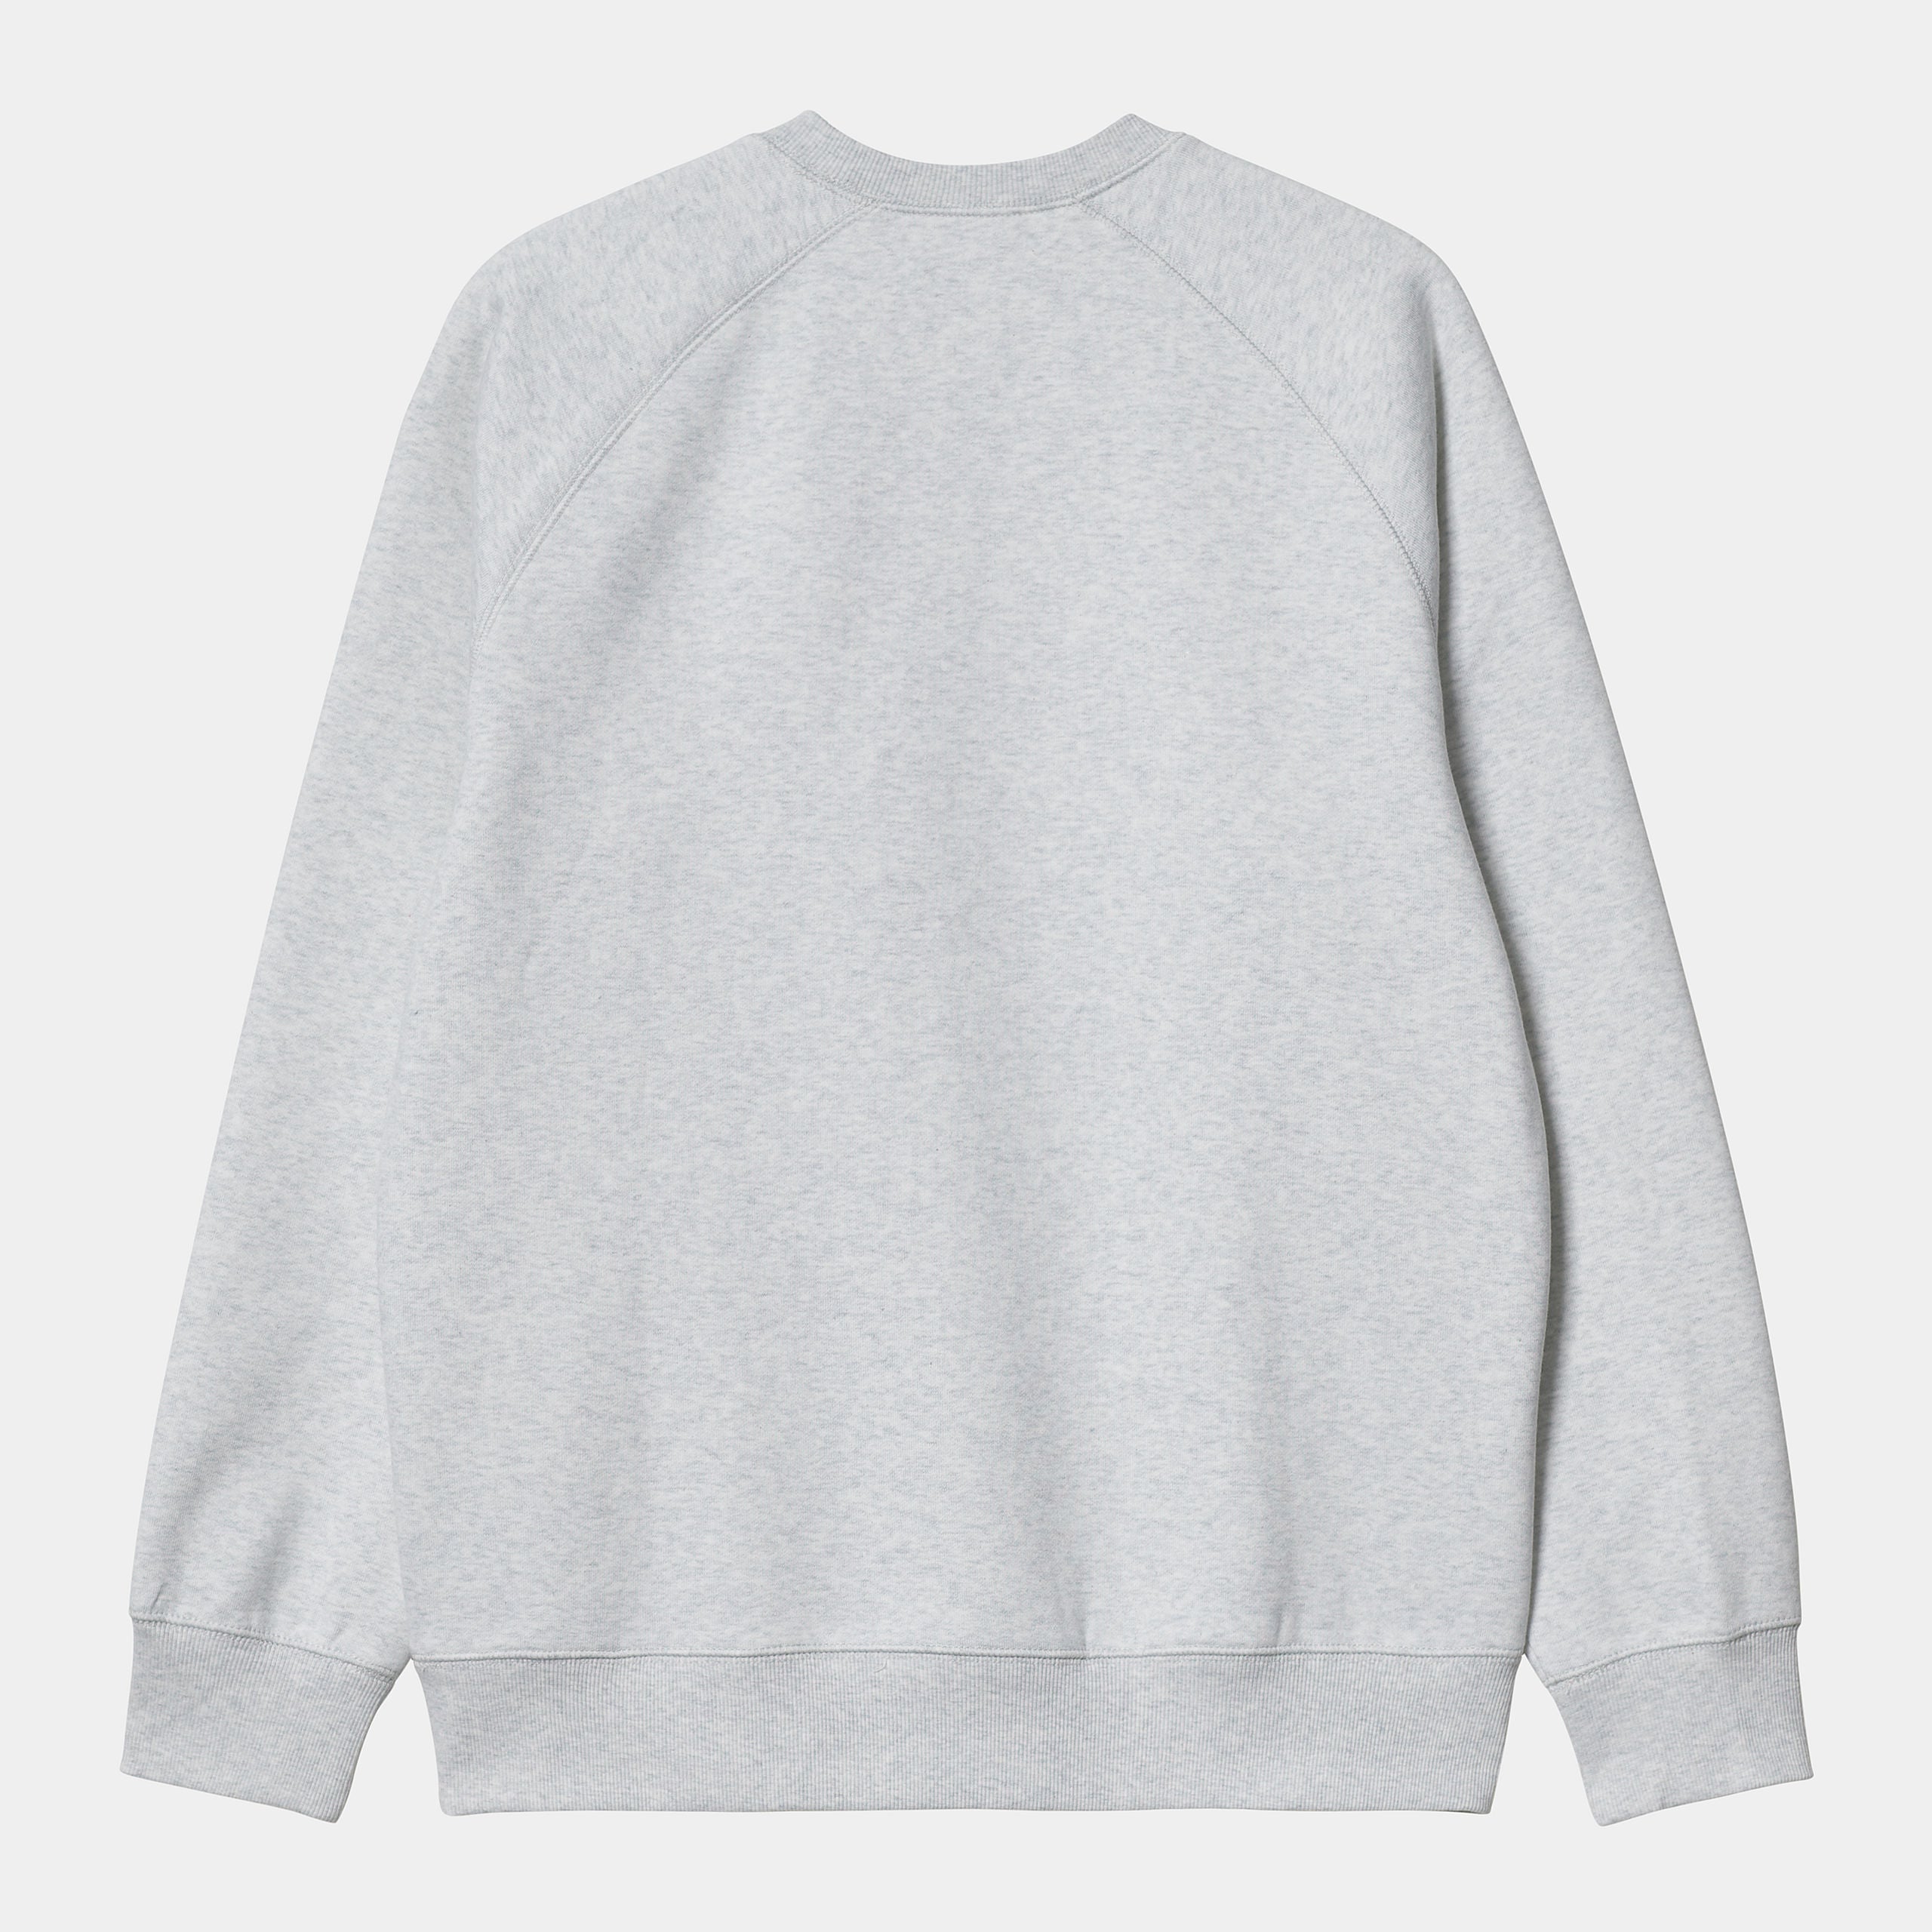 chase-sweat-ash-heather-gold-83_png_a987df90-f23d-4a30-a315-88a0cecccce8.jpg